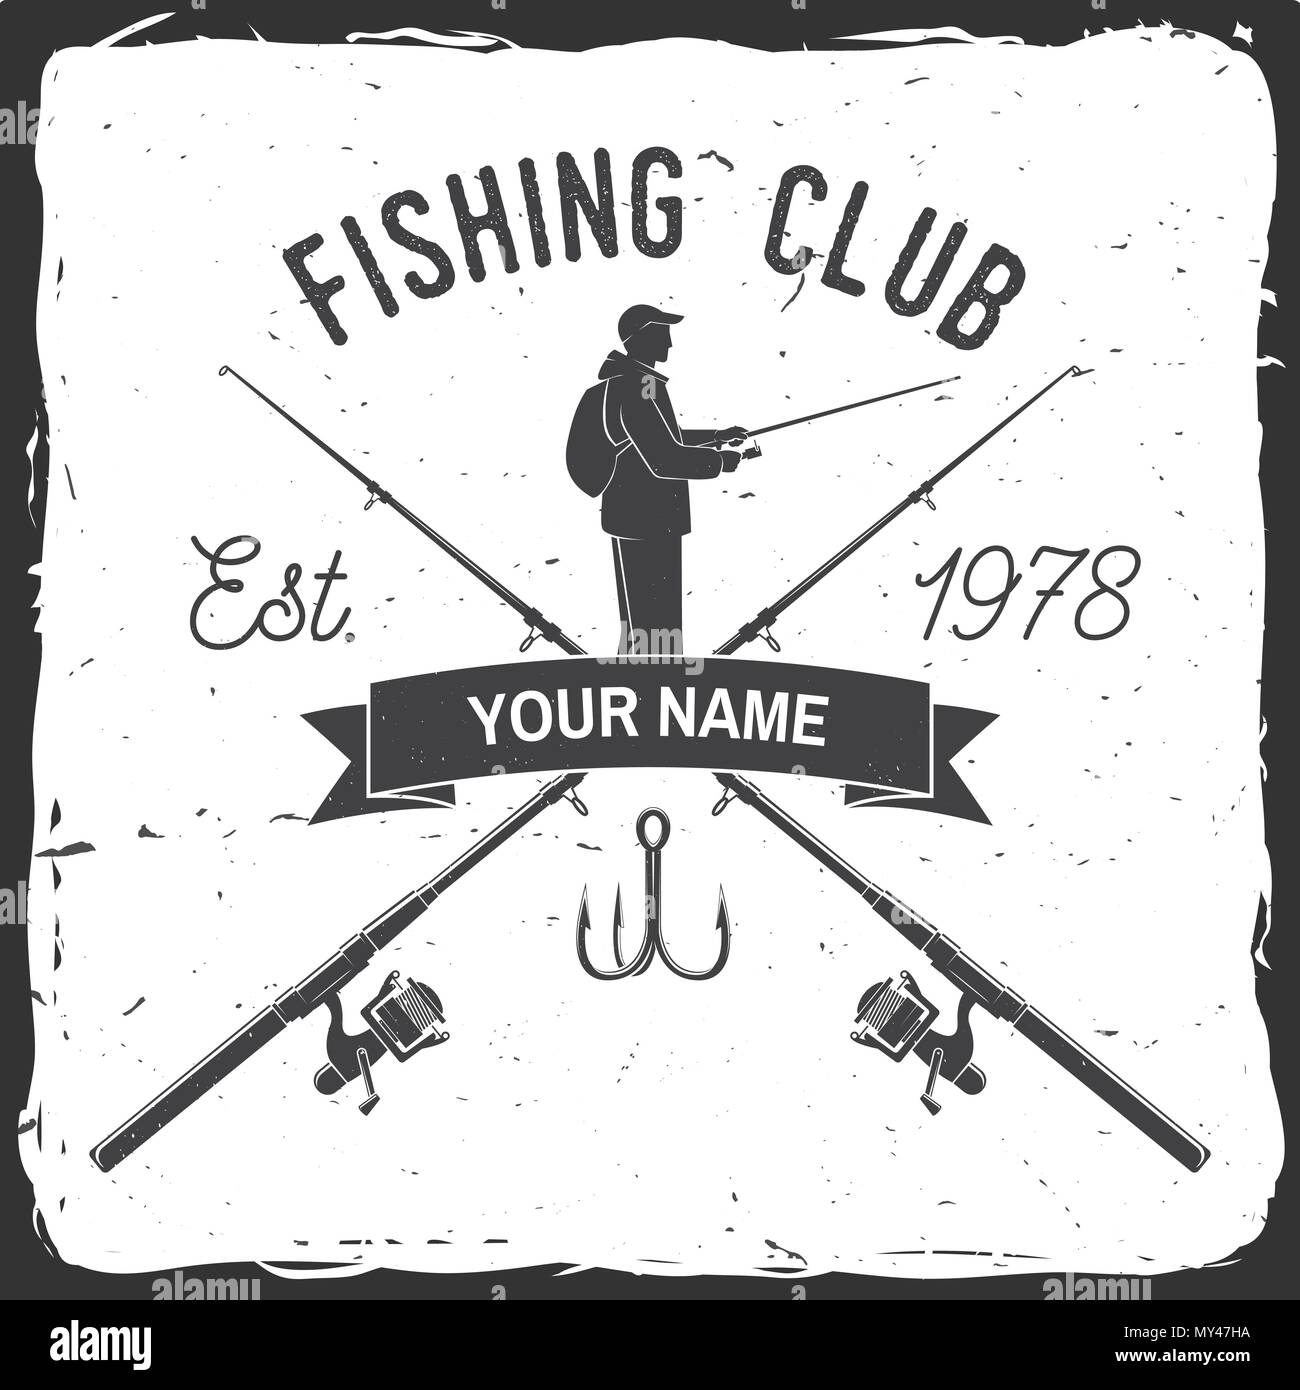 Fishing hook vintage Stock Vector Images - Alamy